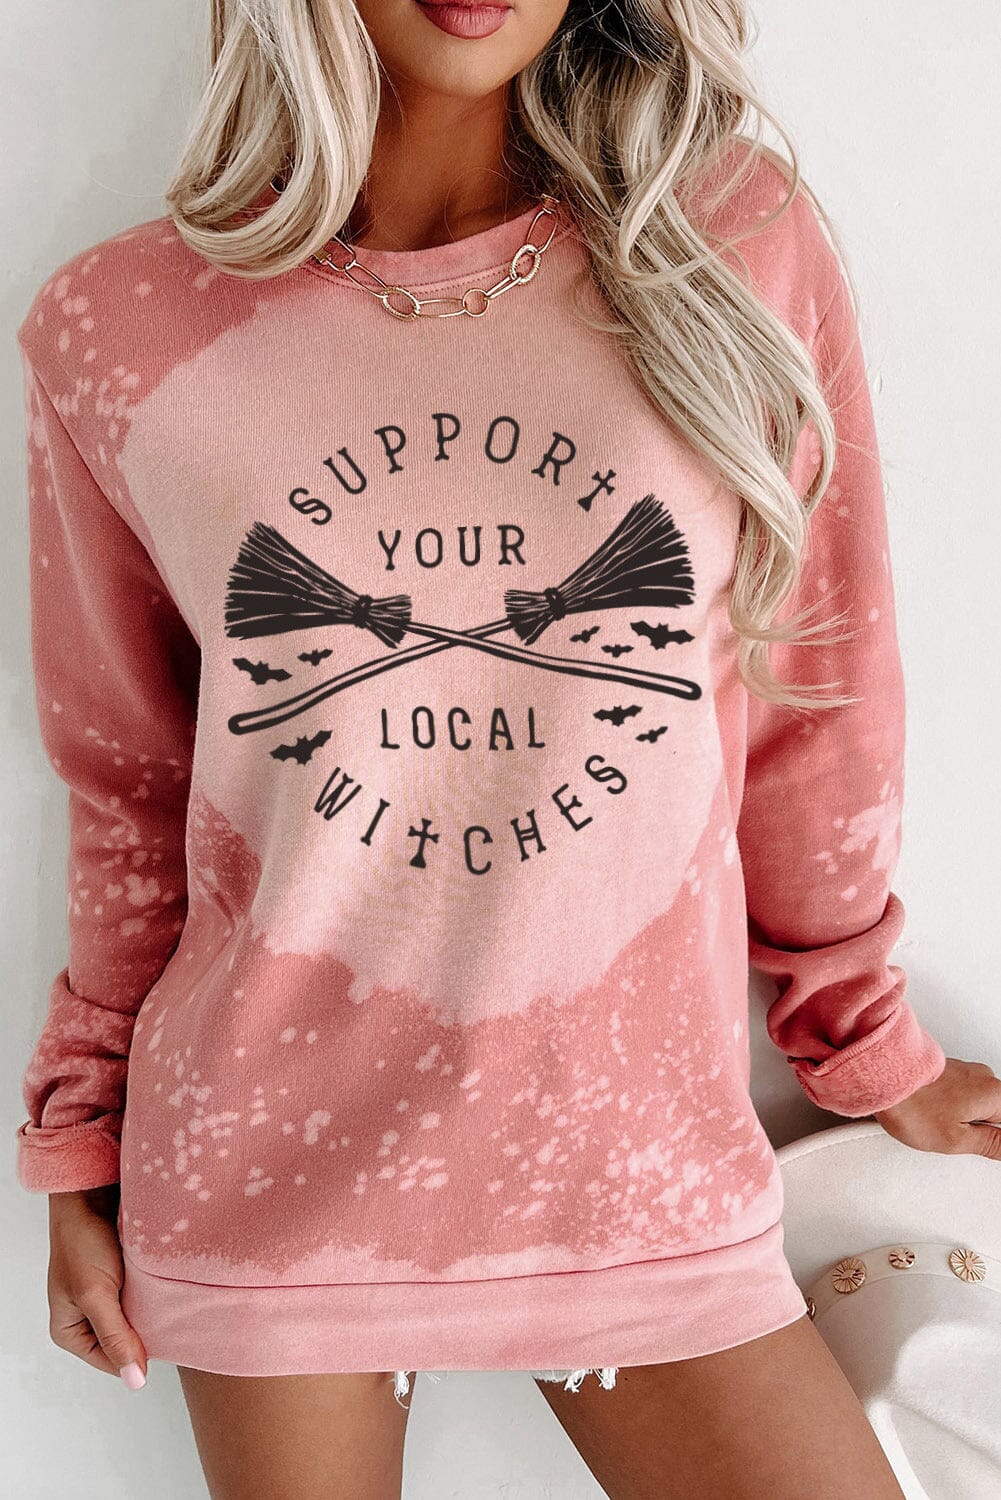 SUPPORT YOUR LOCAL WITCHES Graphic Sweatshirt - Sydney So Sweet